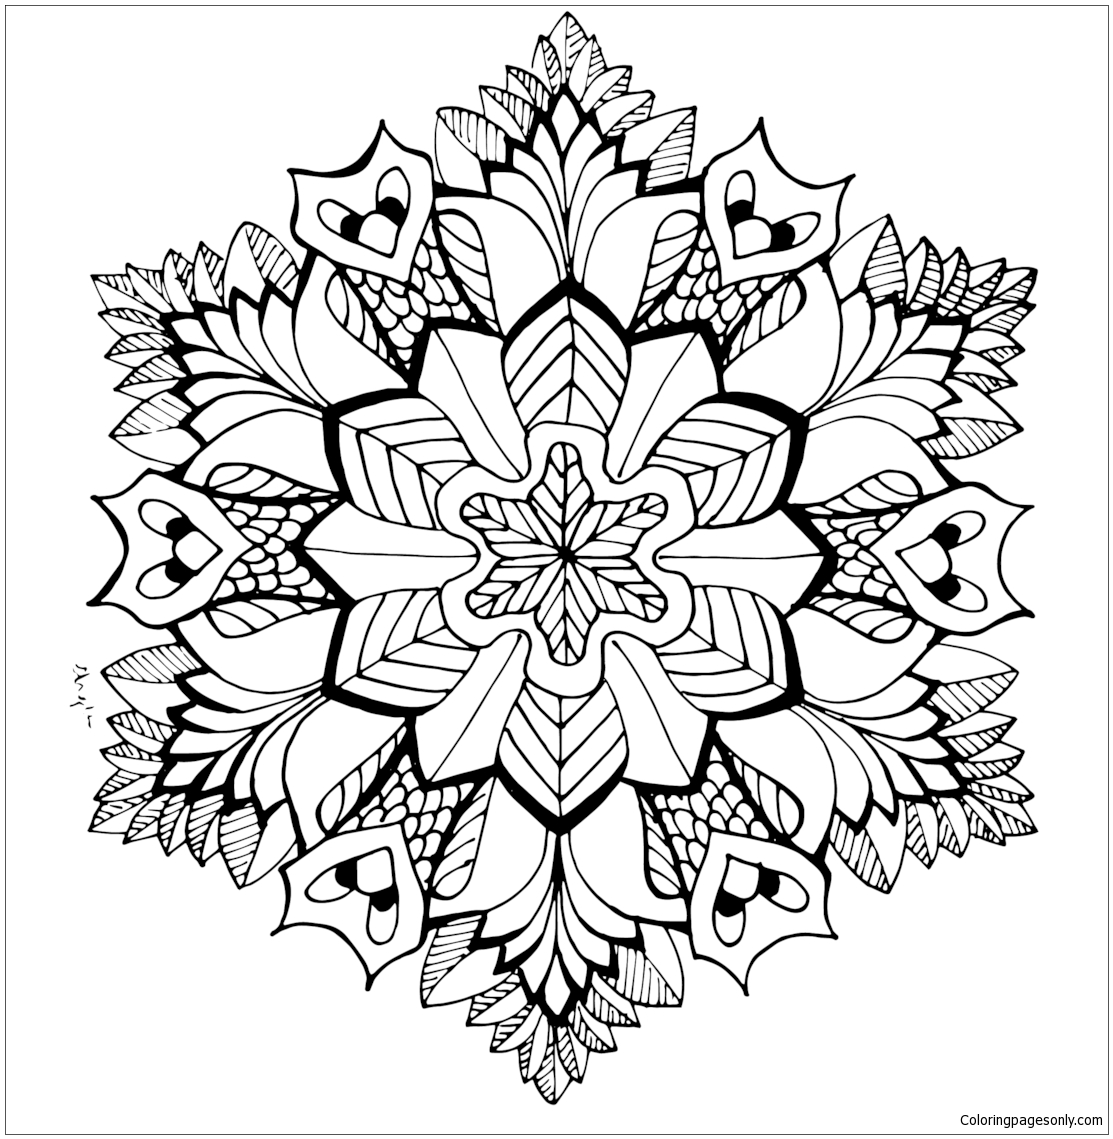 Mandala of Owls Coloring Pages